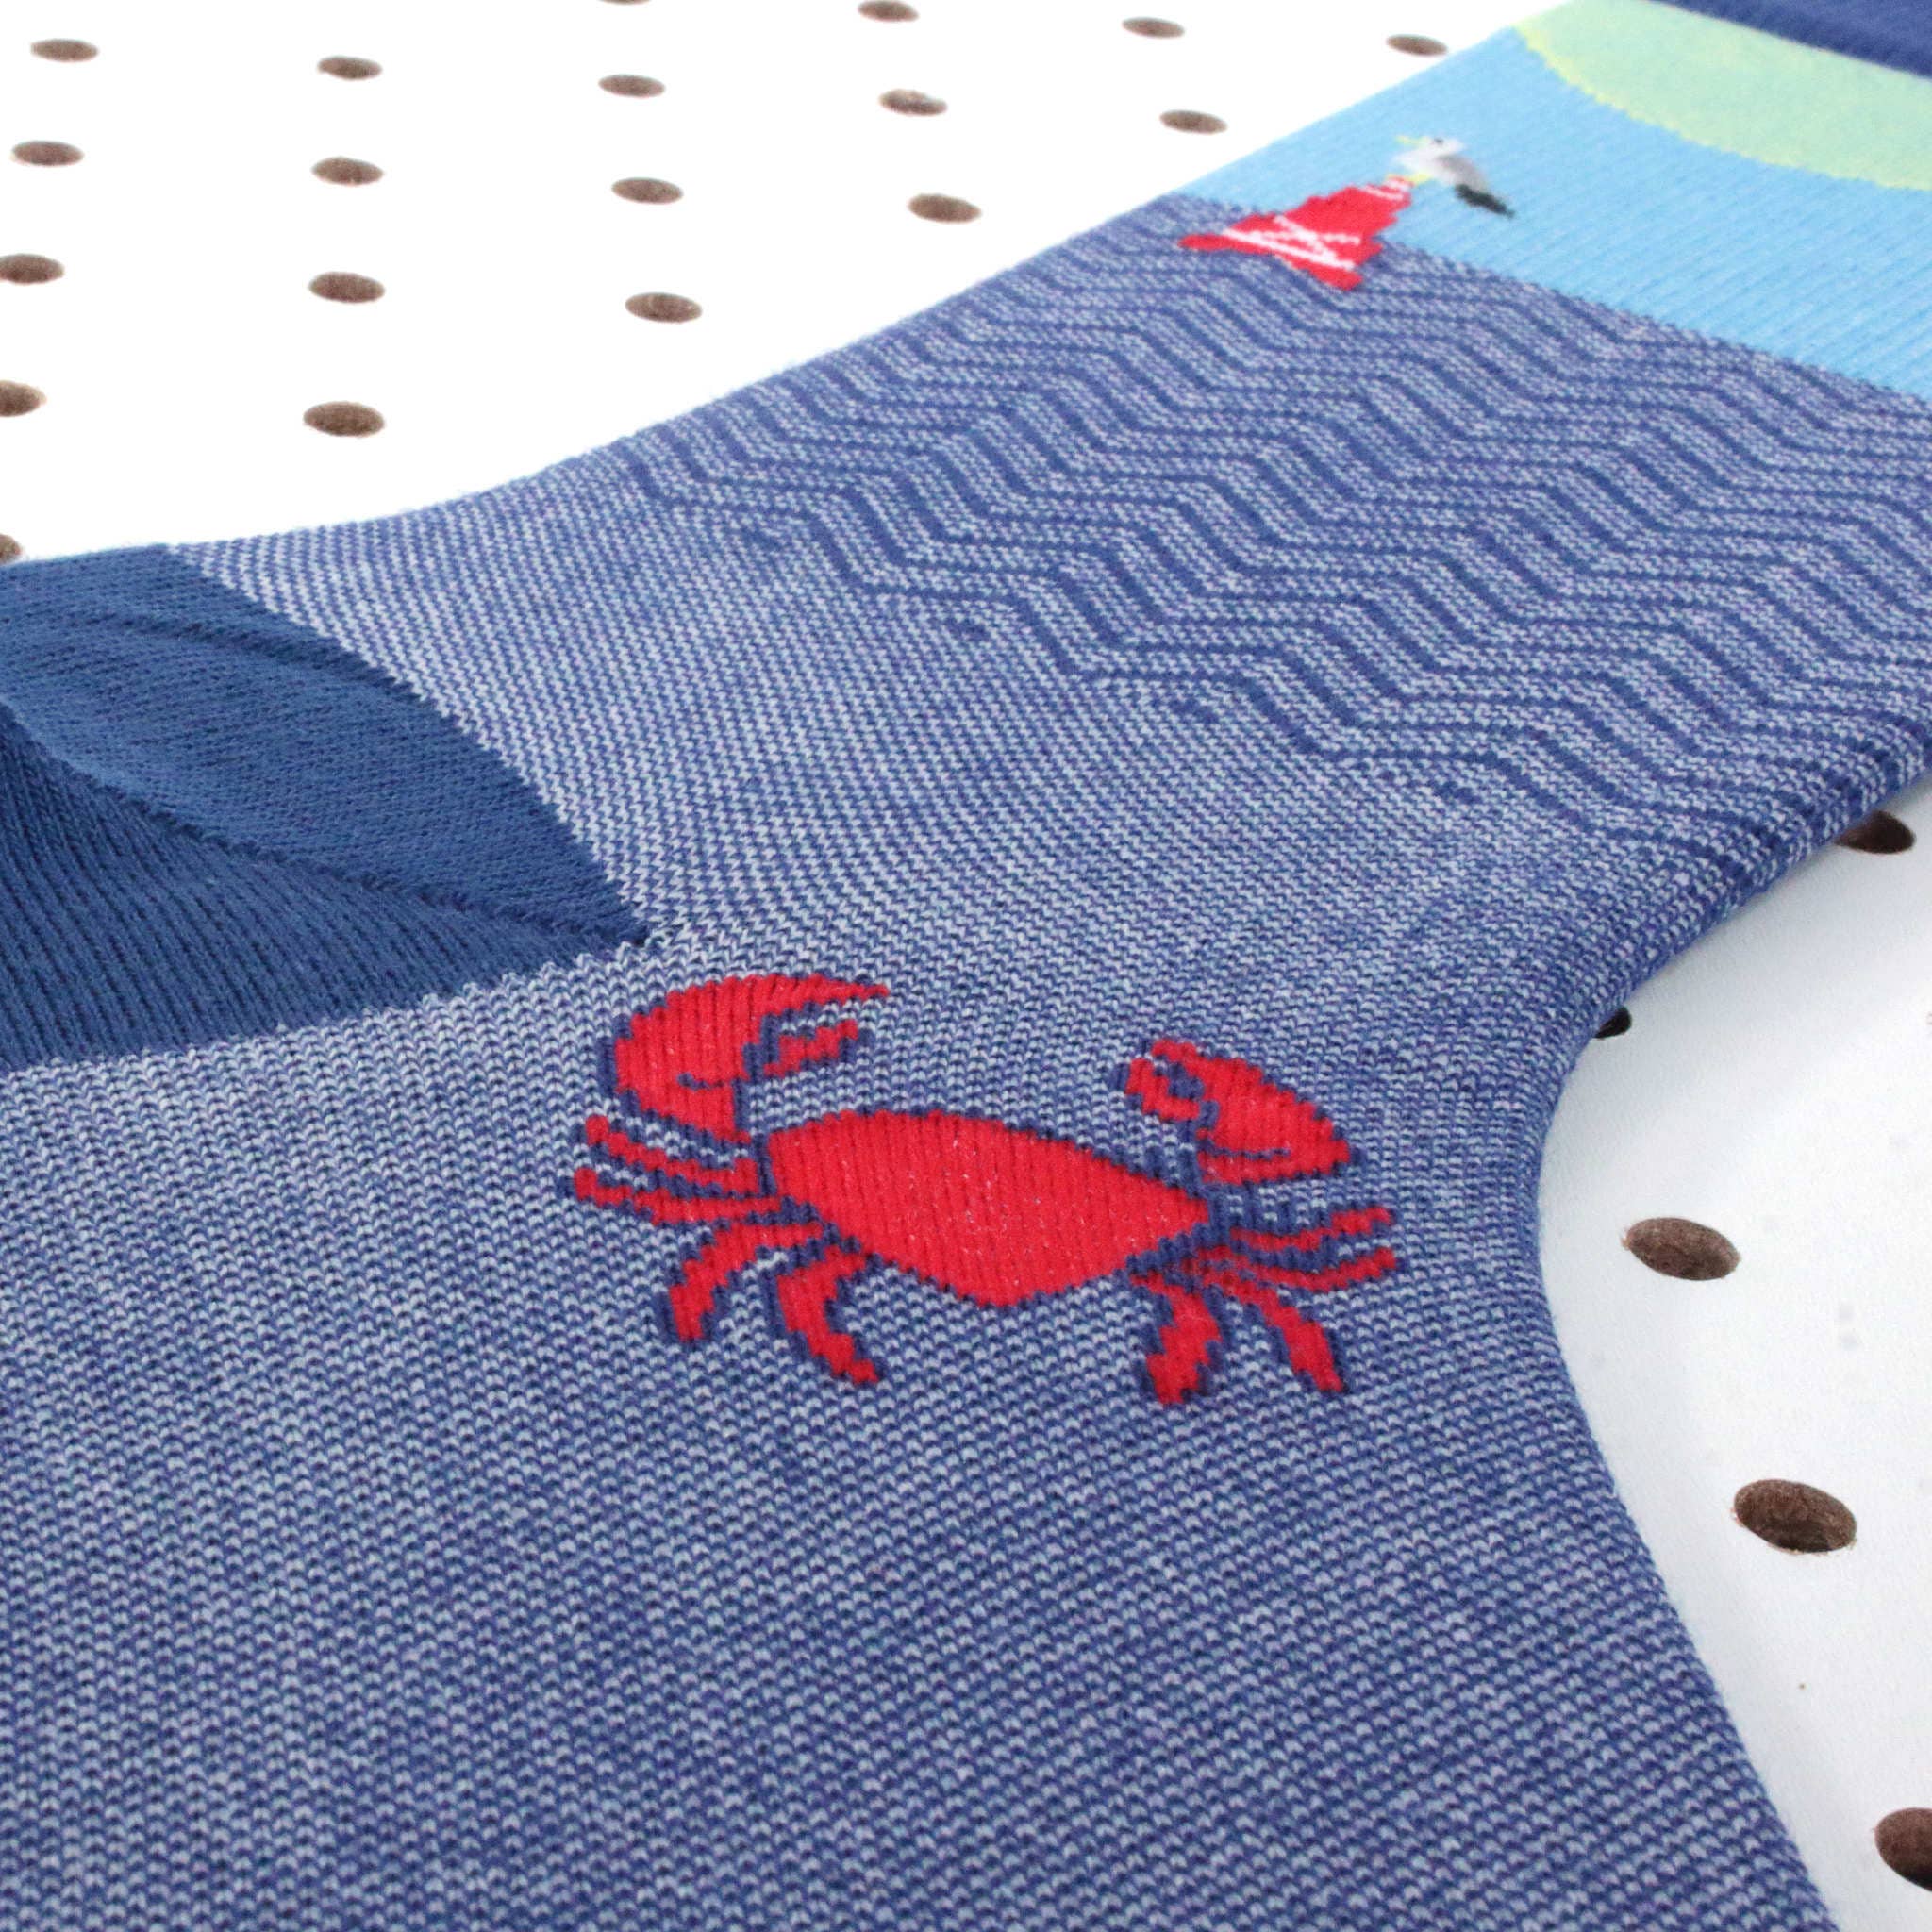 Cast King - Fishing Themed Embroidered Pima Socks